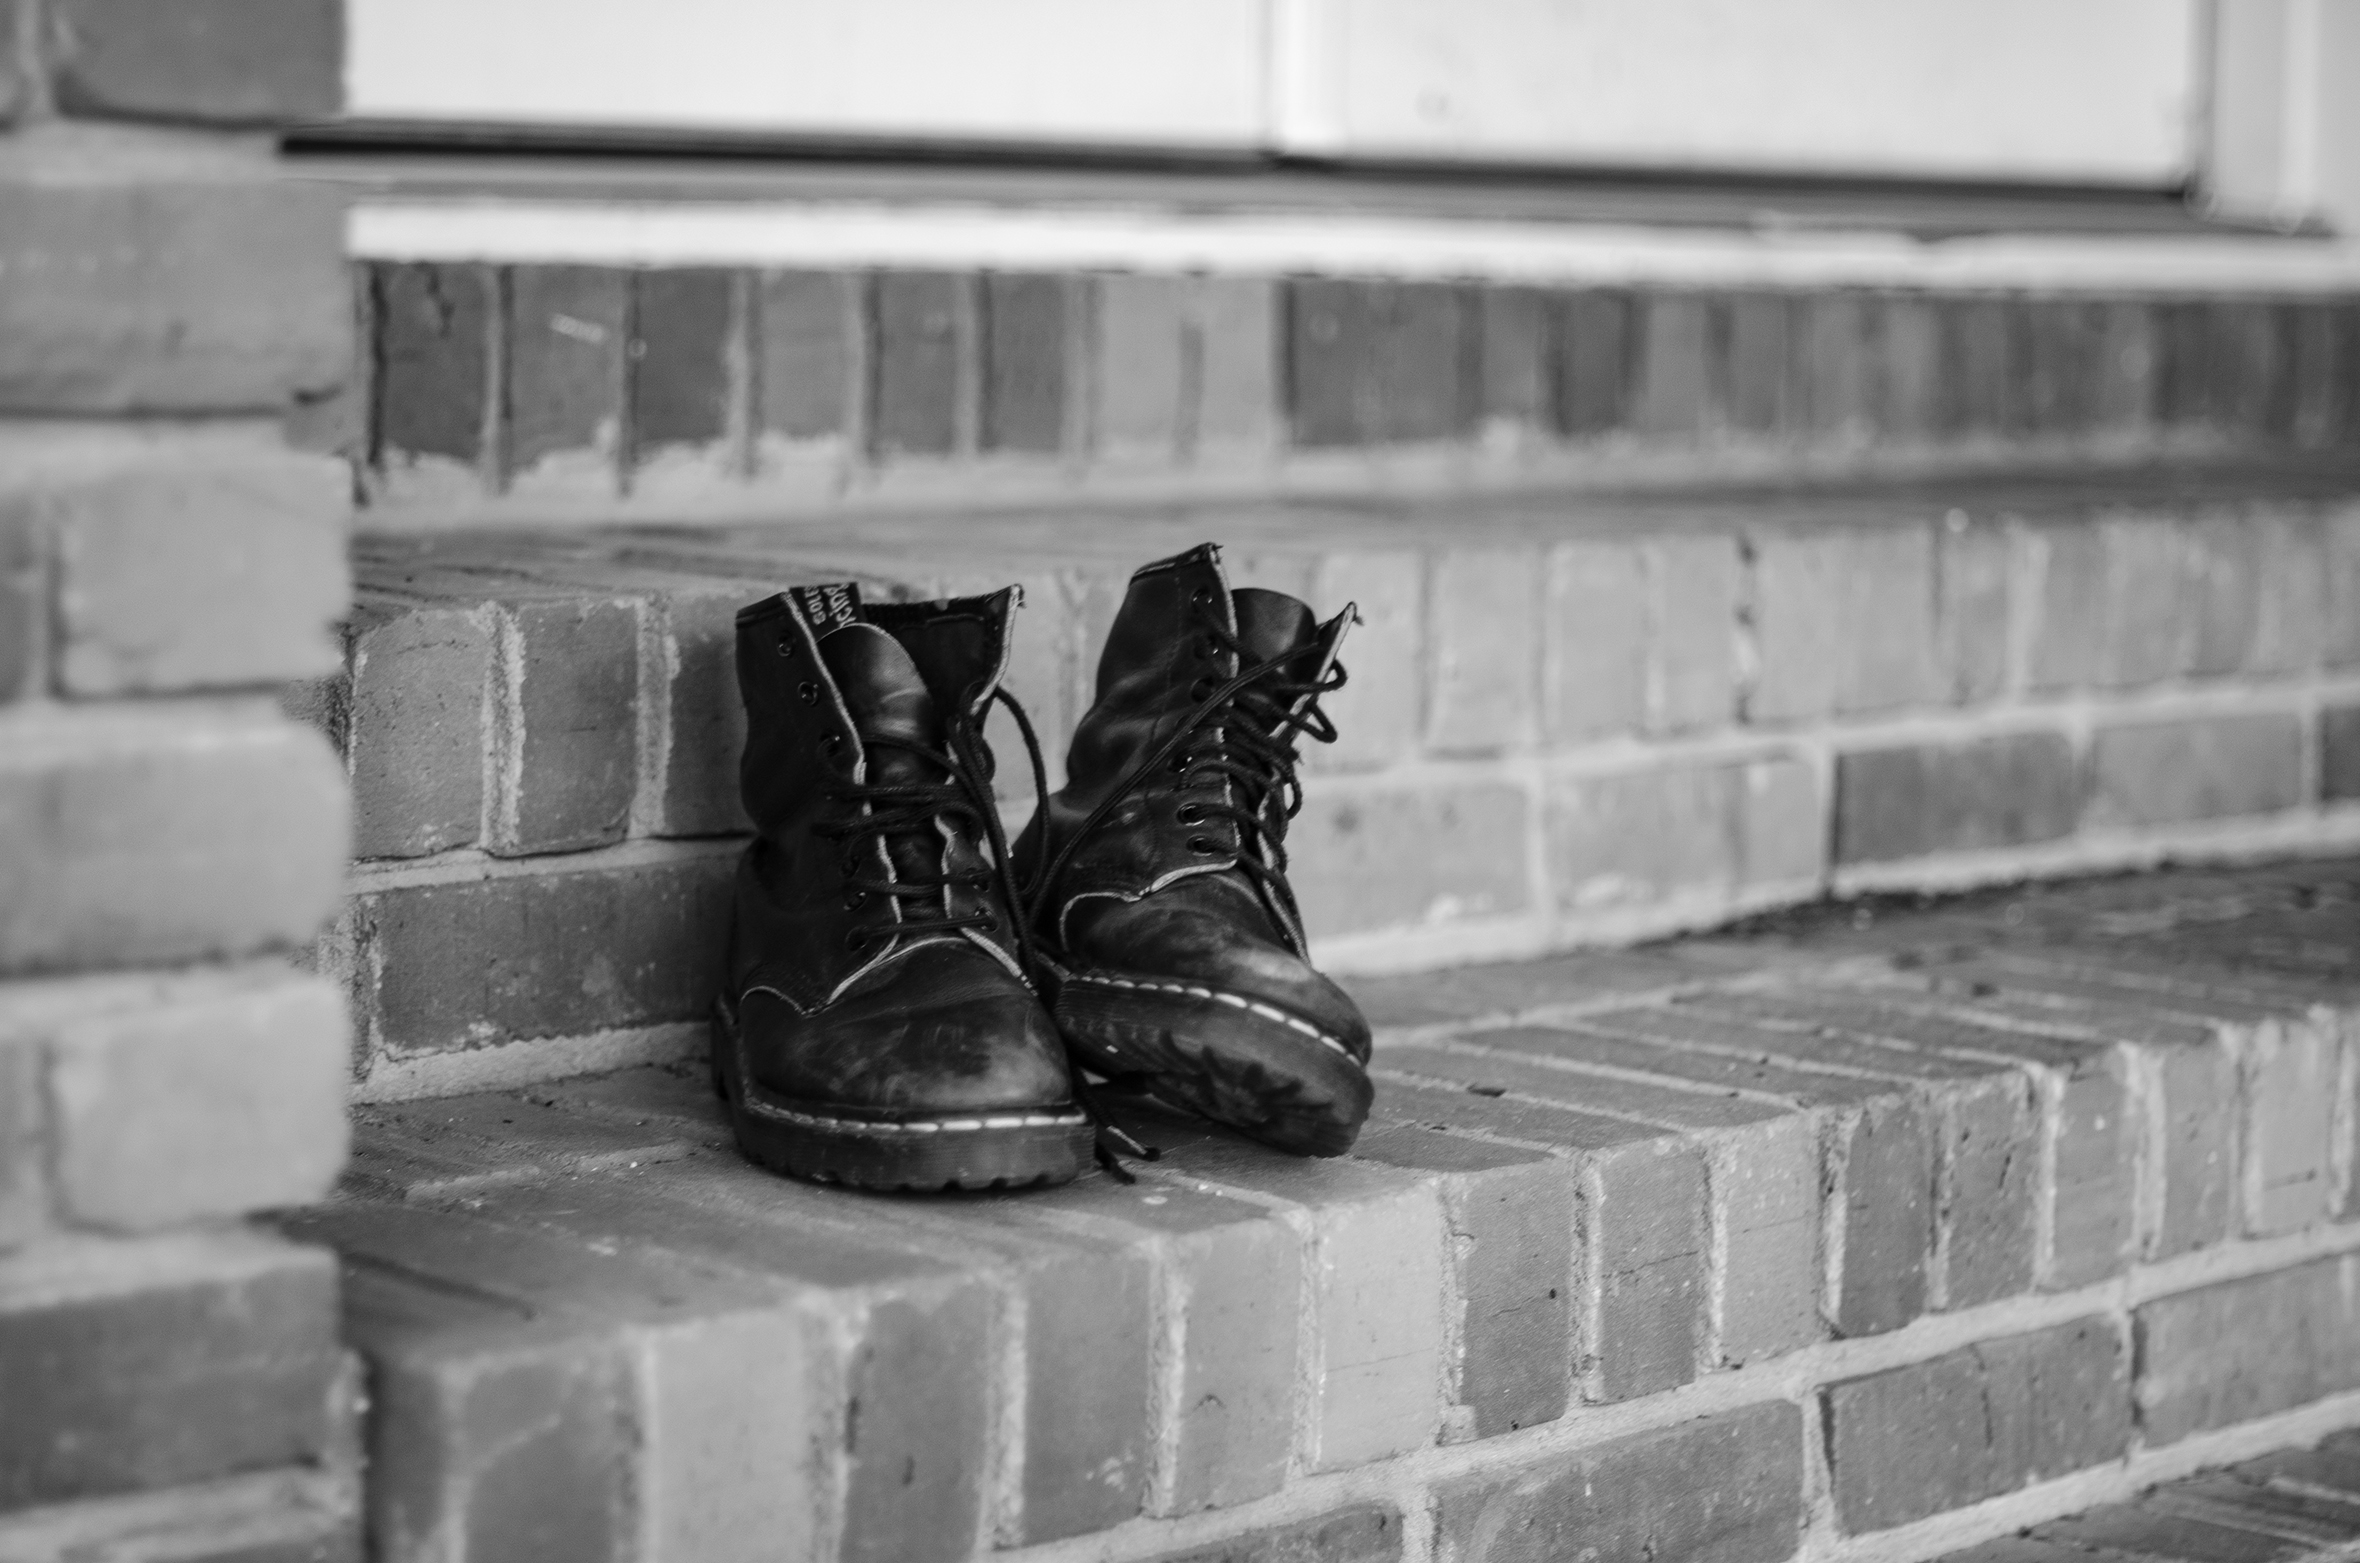 A close-up of black boots upon a brick step outside a door.